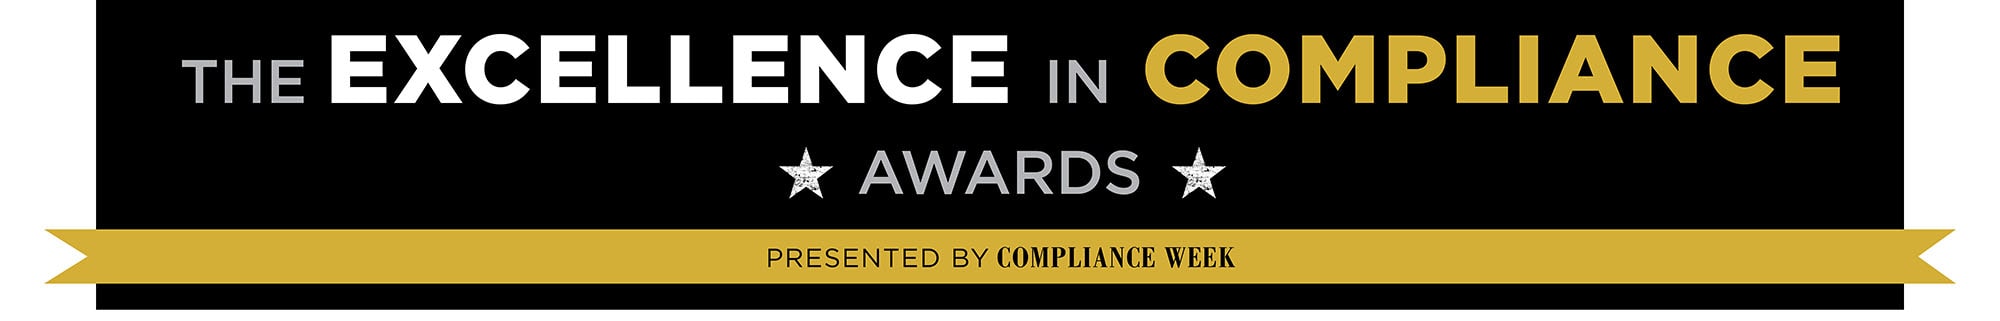 The excellence in compliance awards presented by compliance week banner